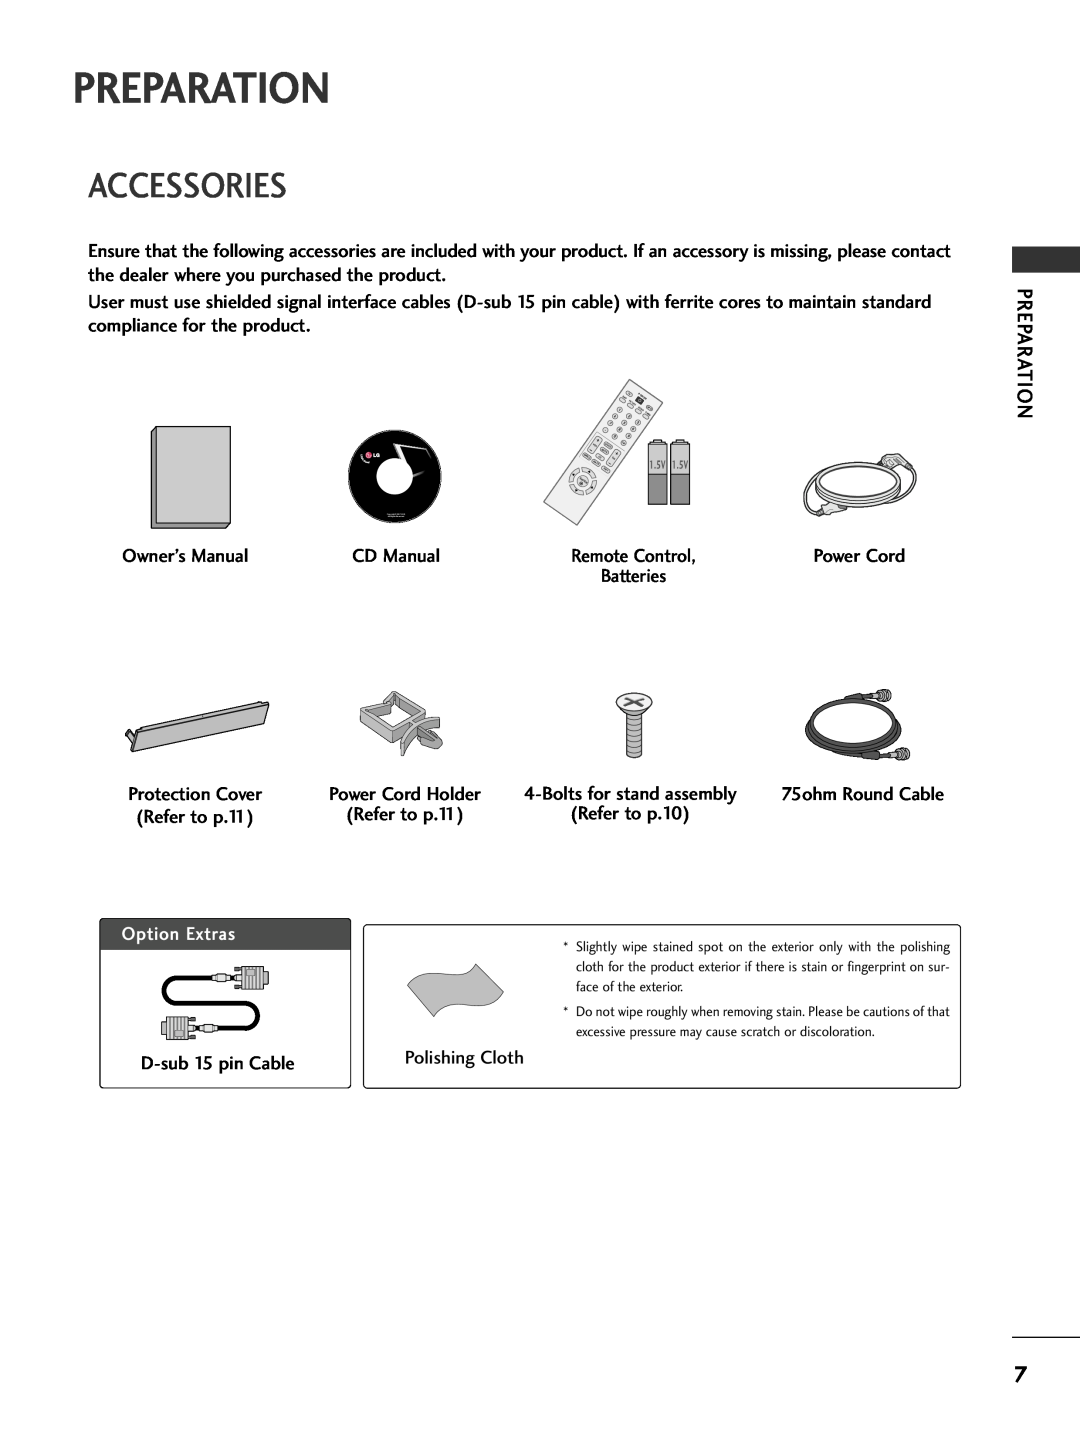 LG Electronics 32PC5DVC owner manual Preparation, Accessories 